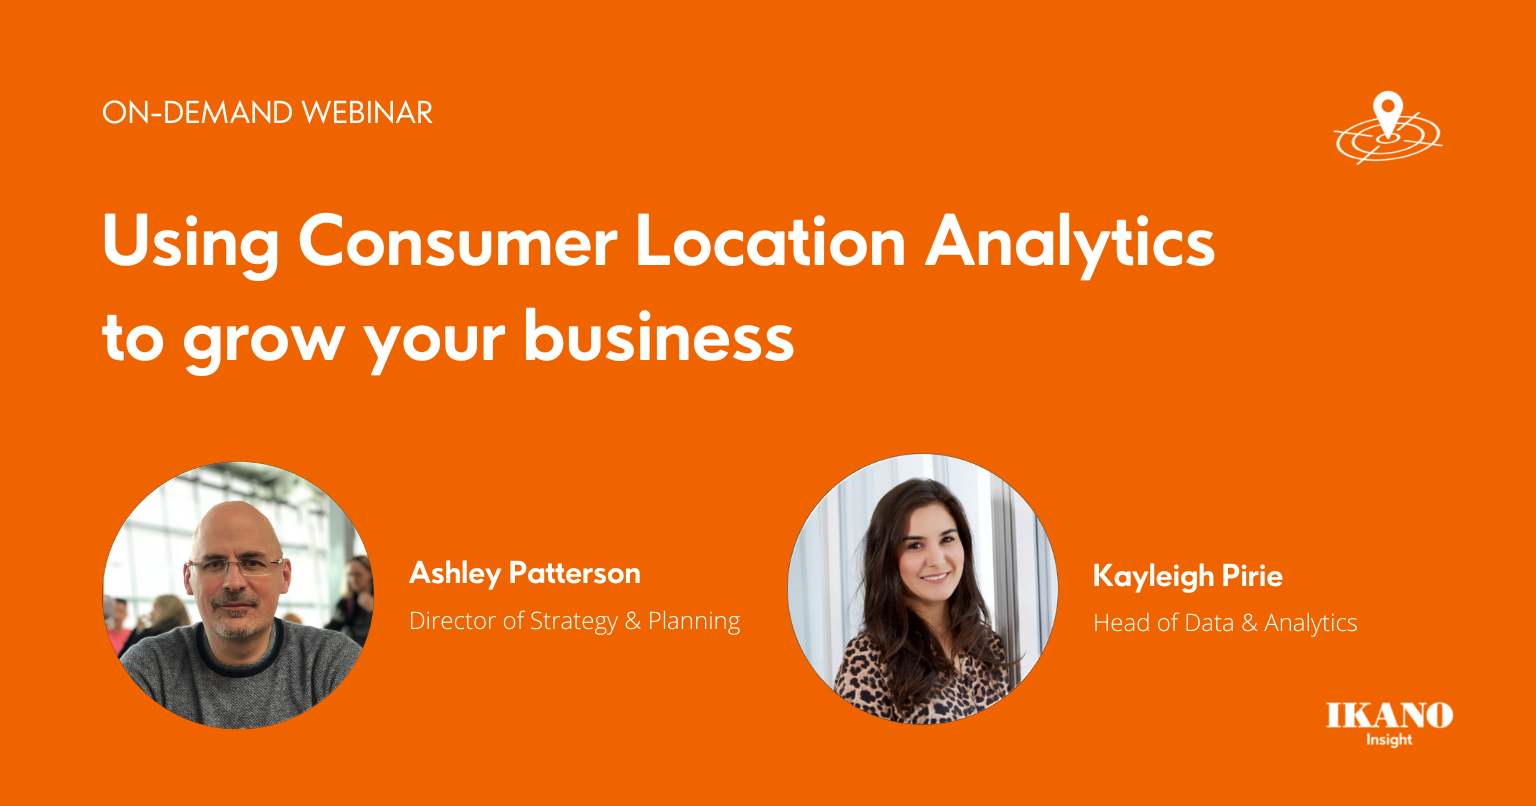 On-demand webinar: Using Consumer Location Analytics to grow your business